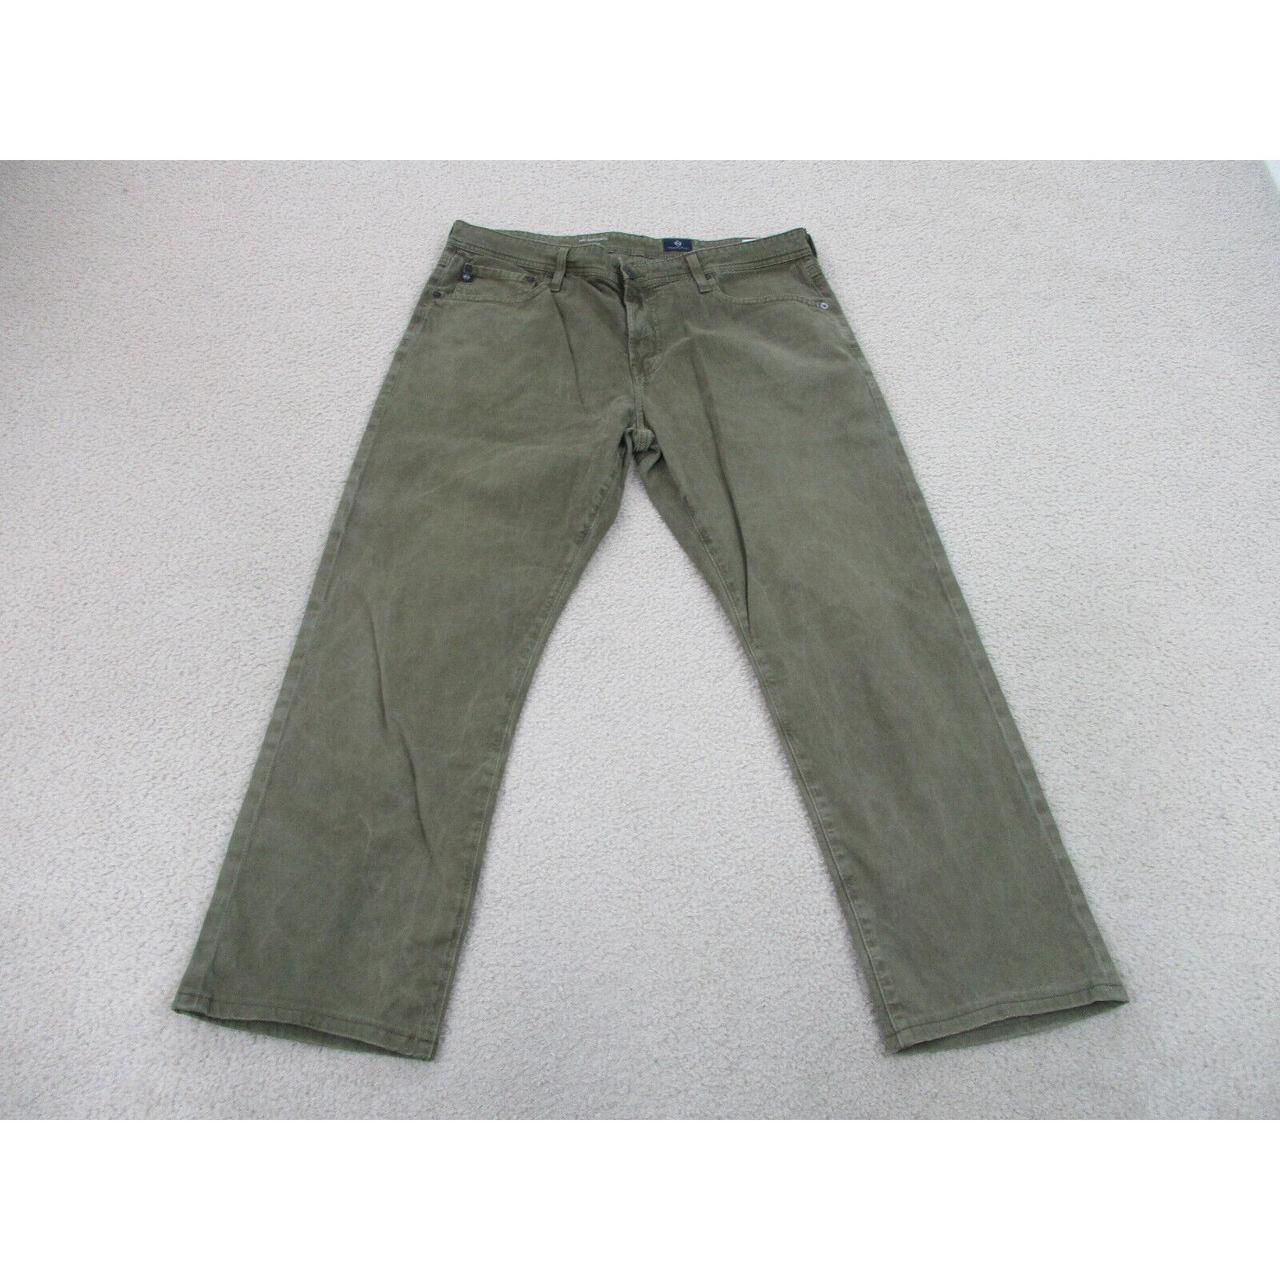 Product Image 1 - Adriano Goldschmied Pants Mens 36